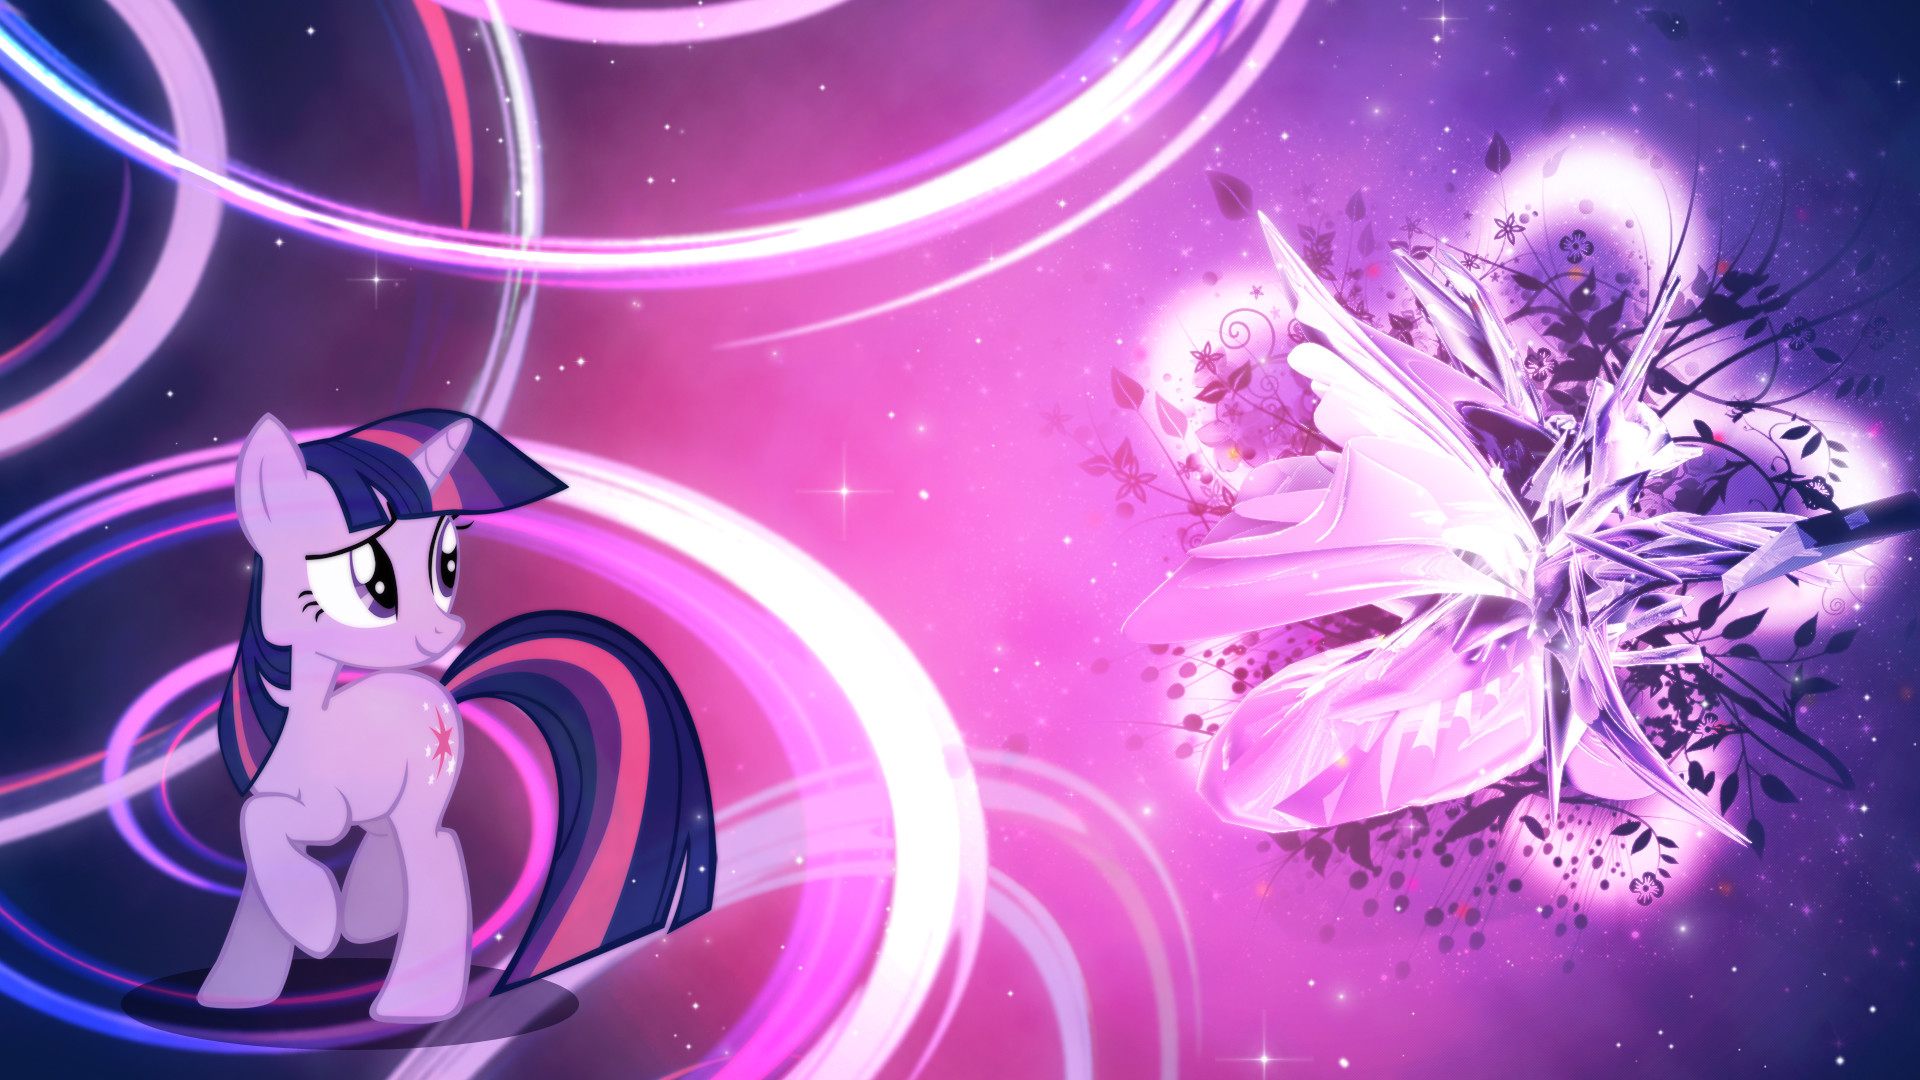 1920x1080 ... Twilight Sparkle - Magic Flower Wallpaper by Unfiltered-N